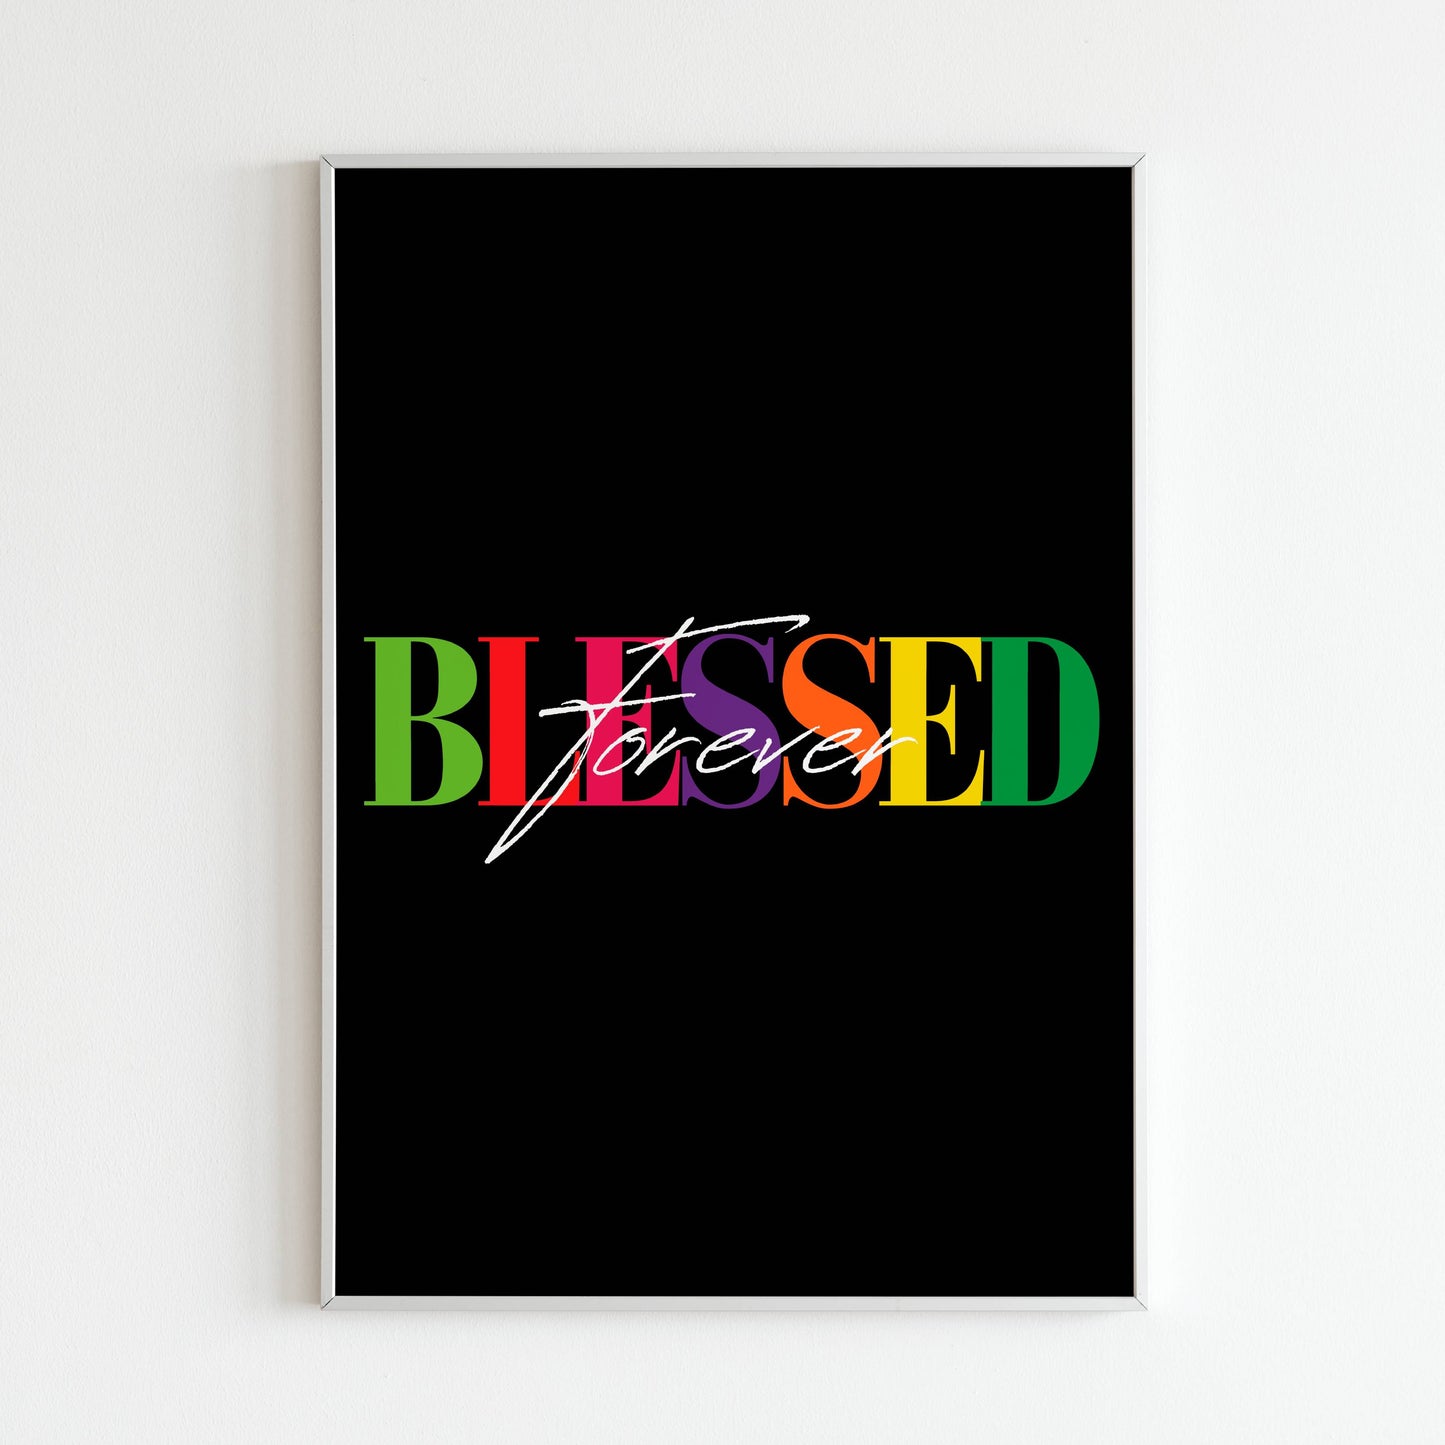 Downloadable "Blessed forever" wall art for a message of lasting gratitude.